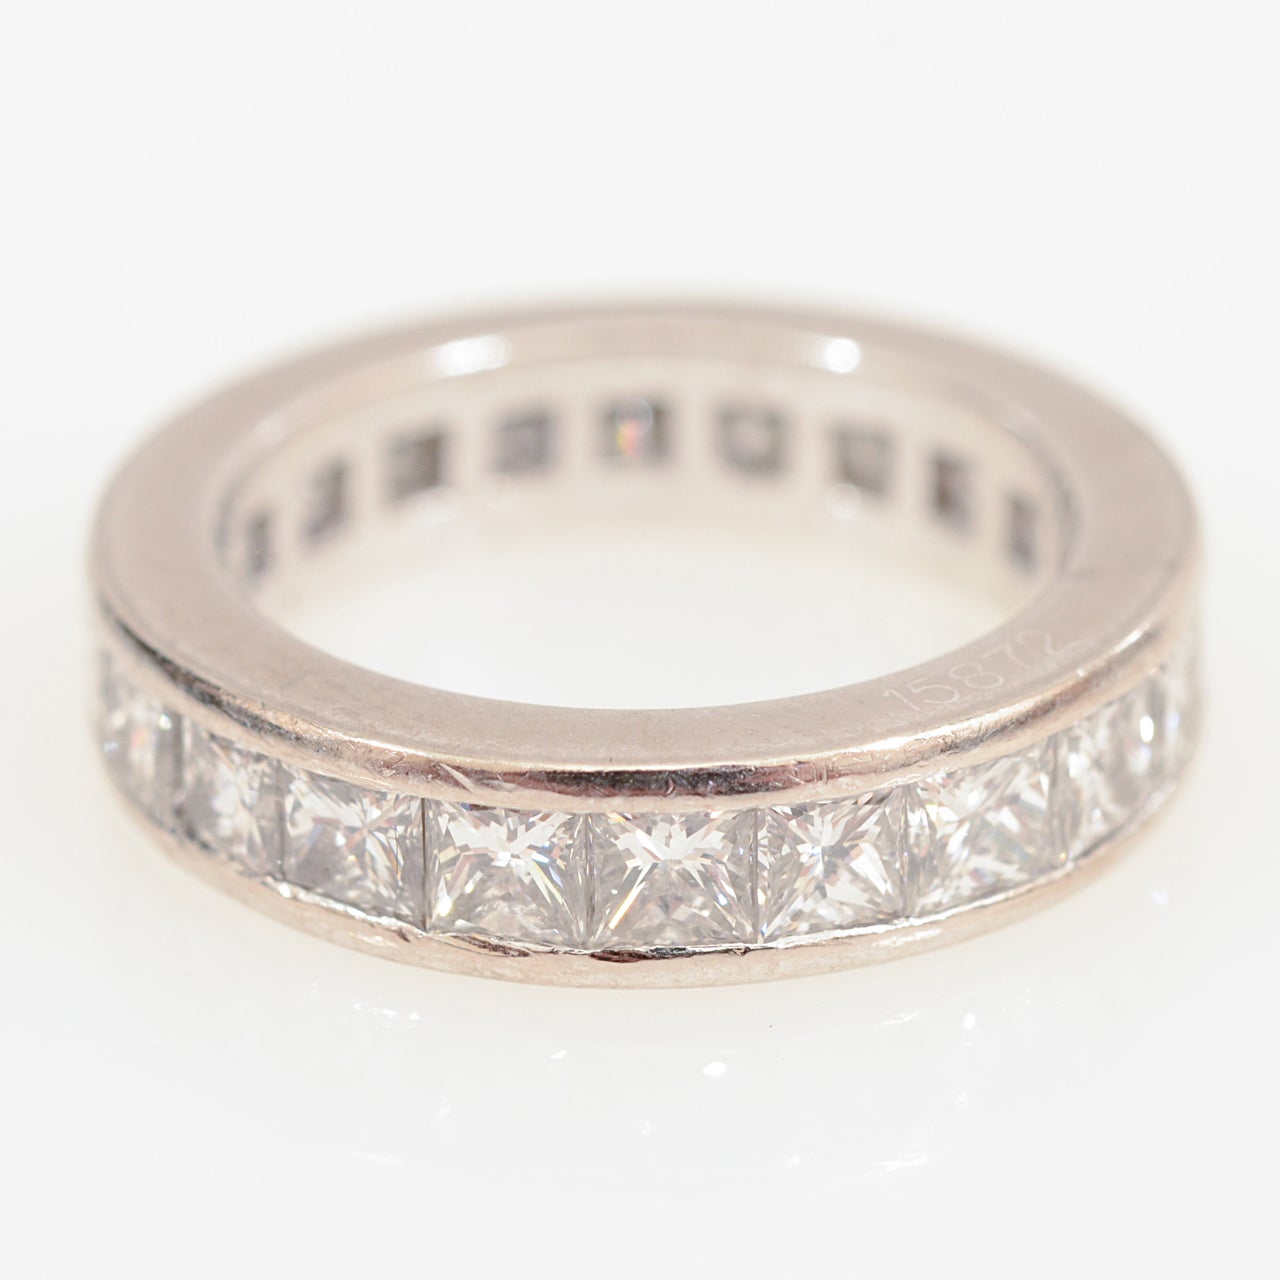 GRAFF Eternity Diamond Ring.

Consist of 22 white princess cut diamonds weighing approximately 3.68 carats,
VS quality.
Size 5 1/2